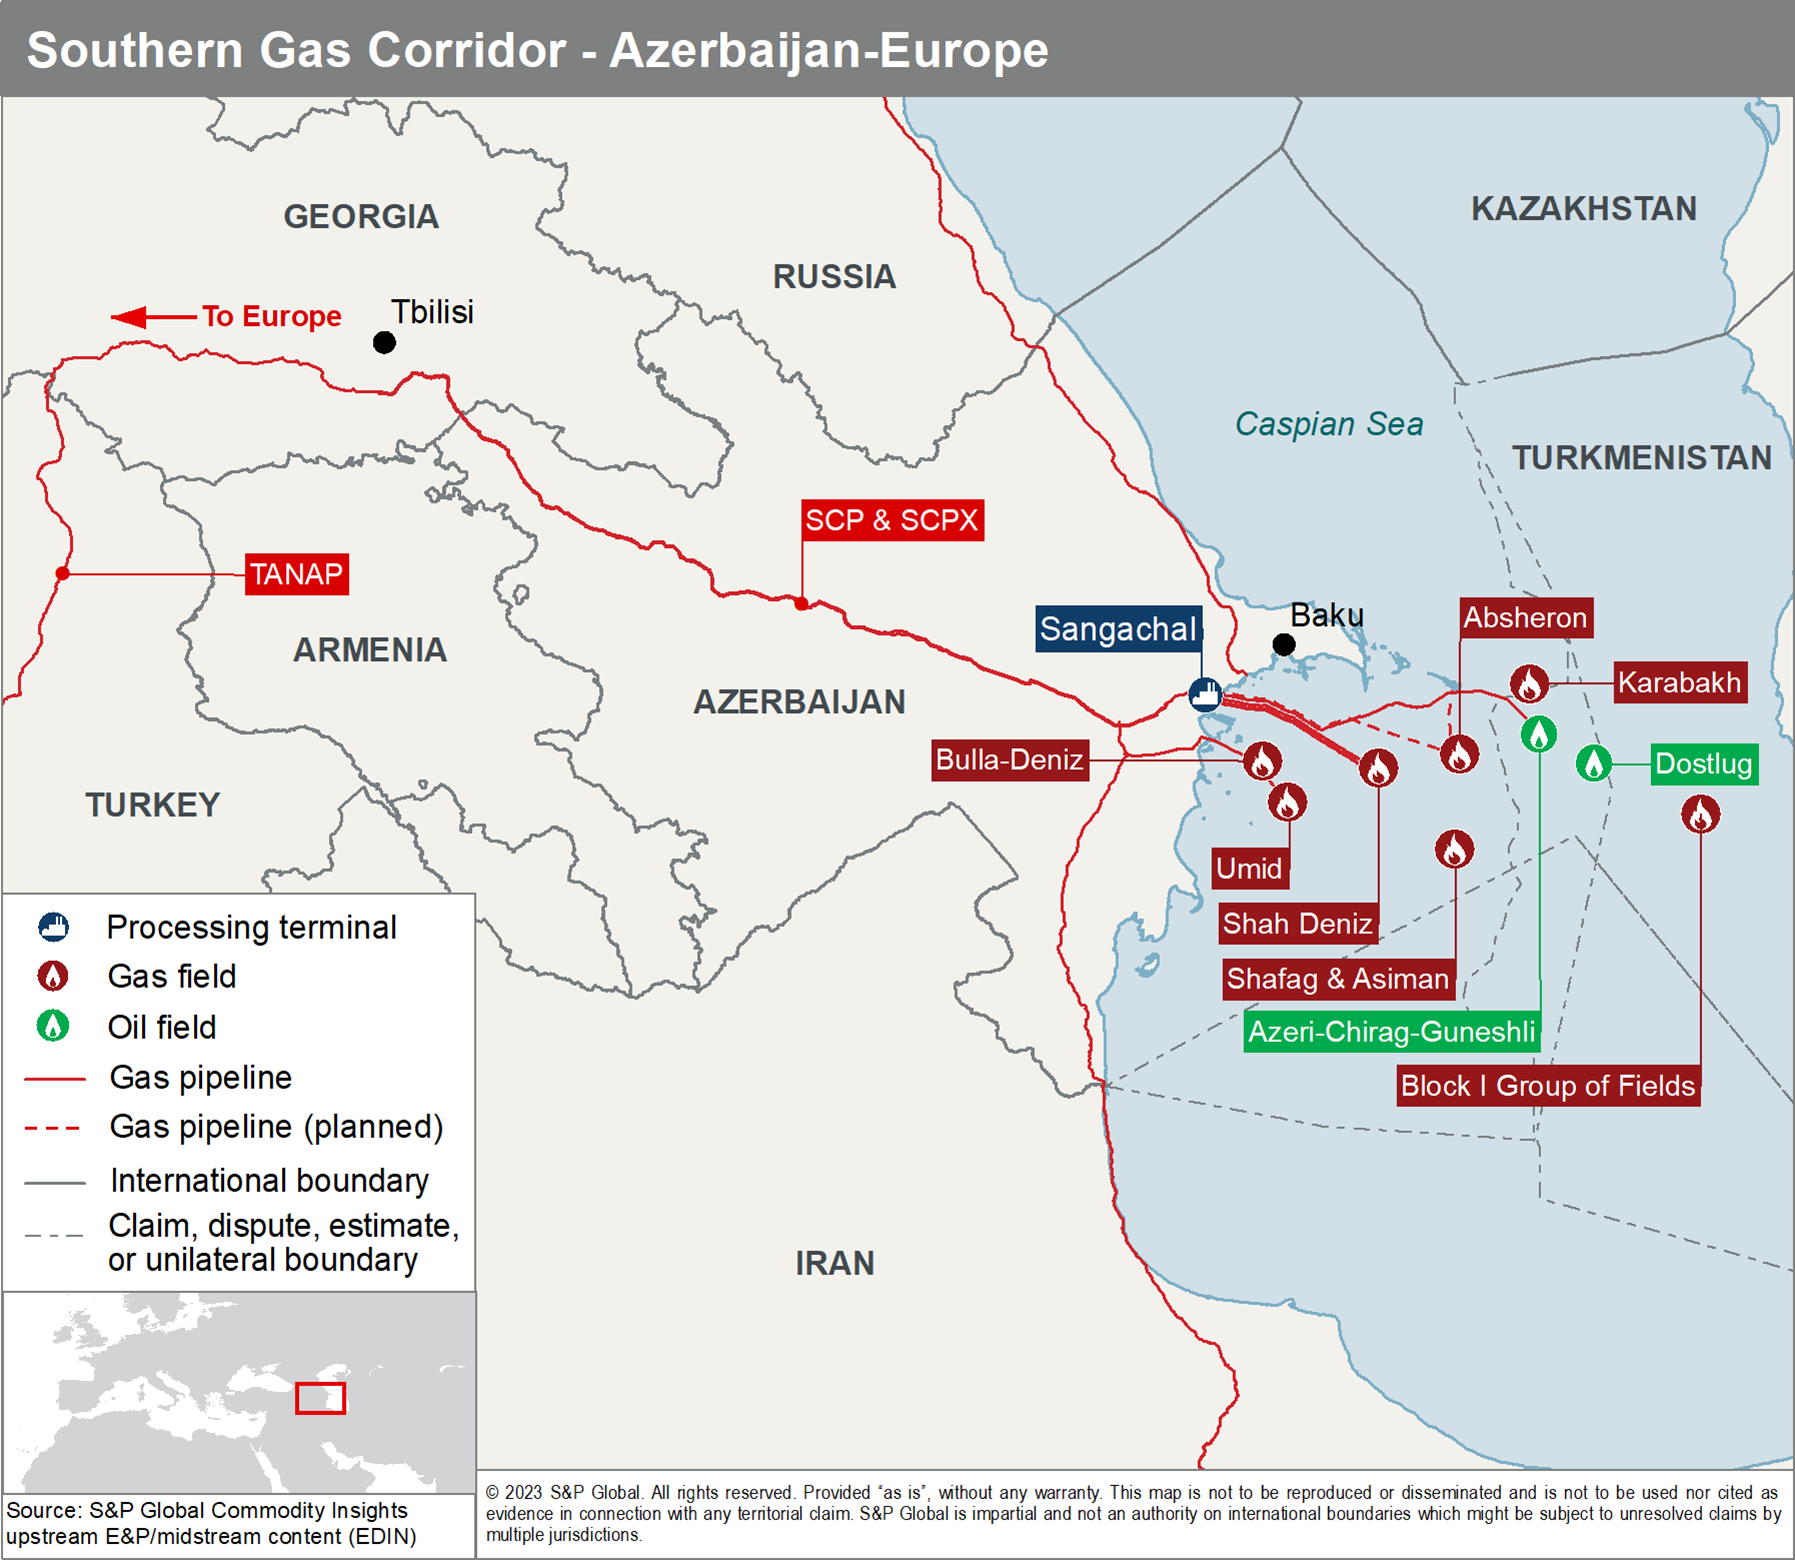 Figure 1: Offshore fields and infrastructure around the Southern Gas Corridor.